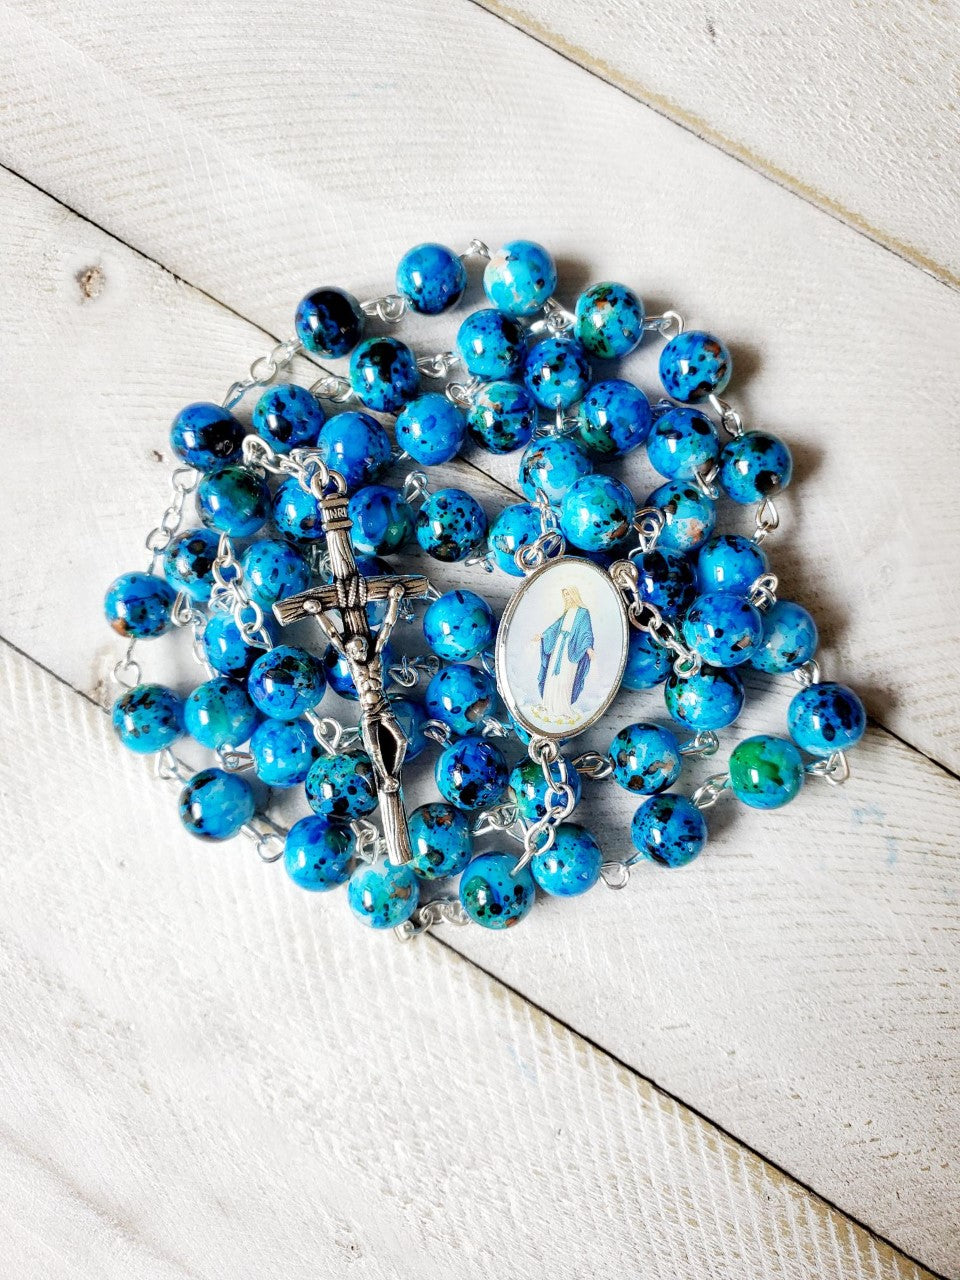 Our Lady of the Immaculate Conception Rosary